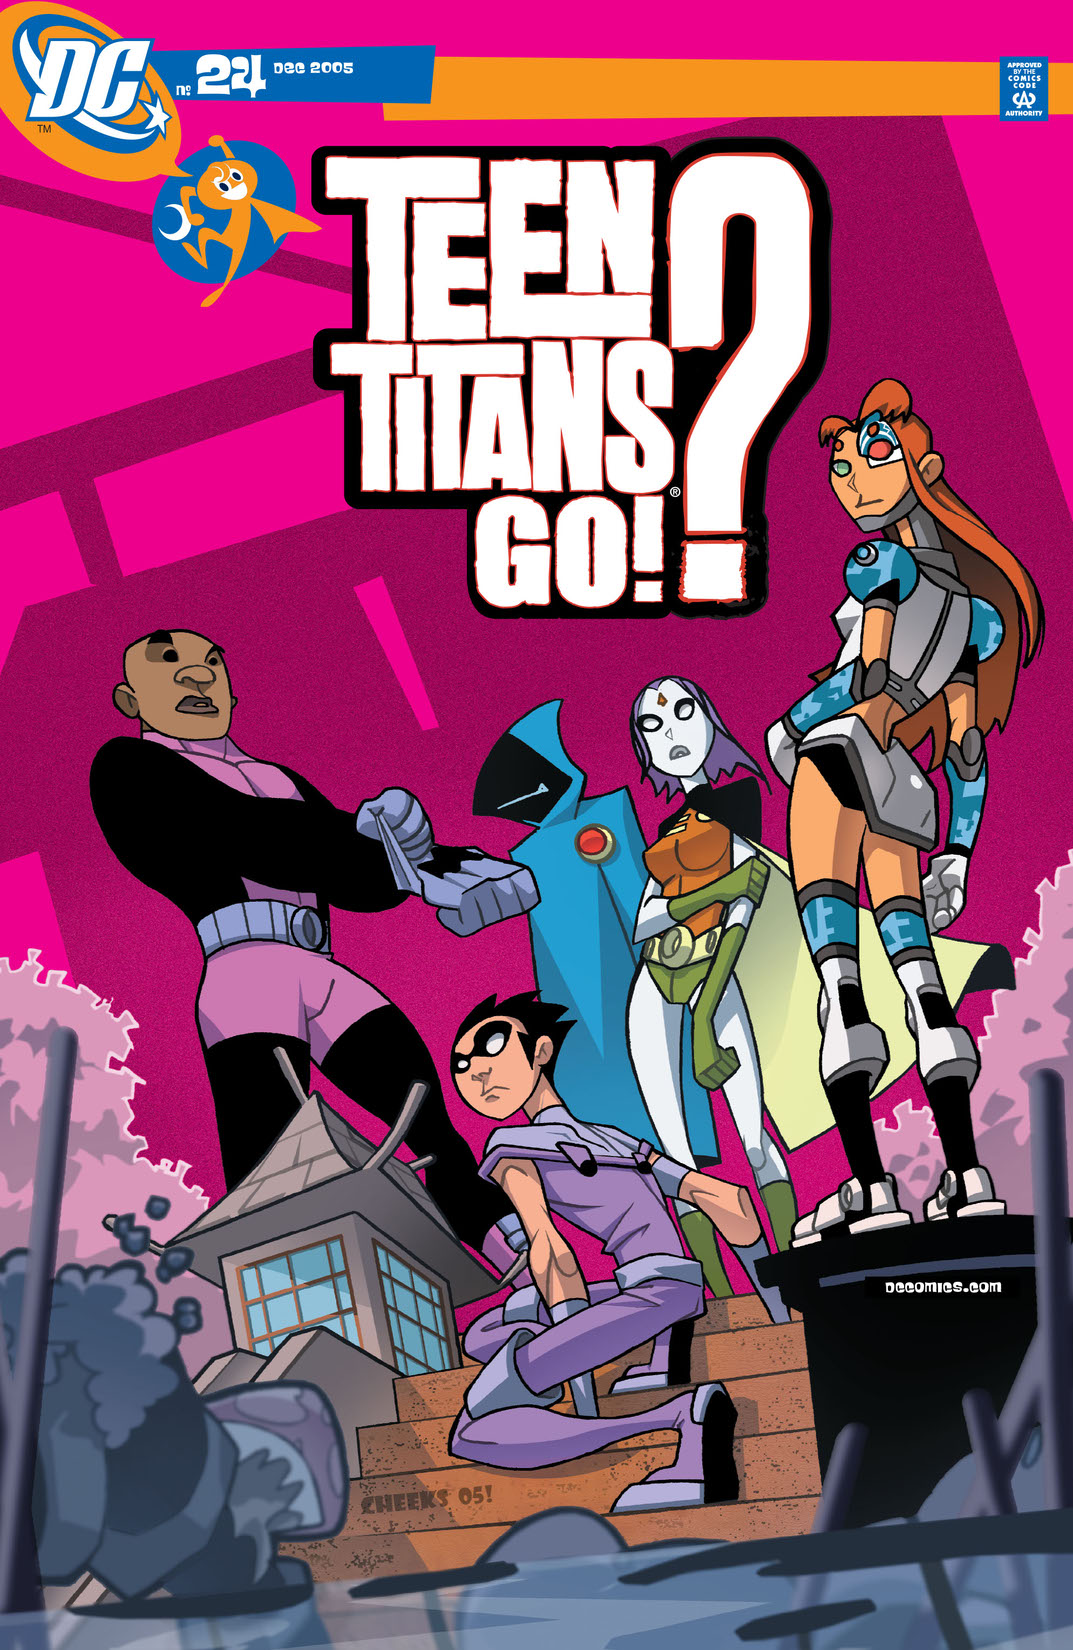 Teen Titans Go! (2003-) #24 preview images